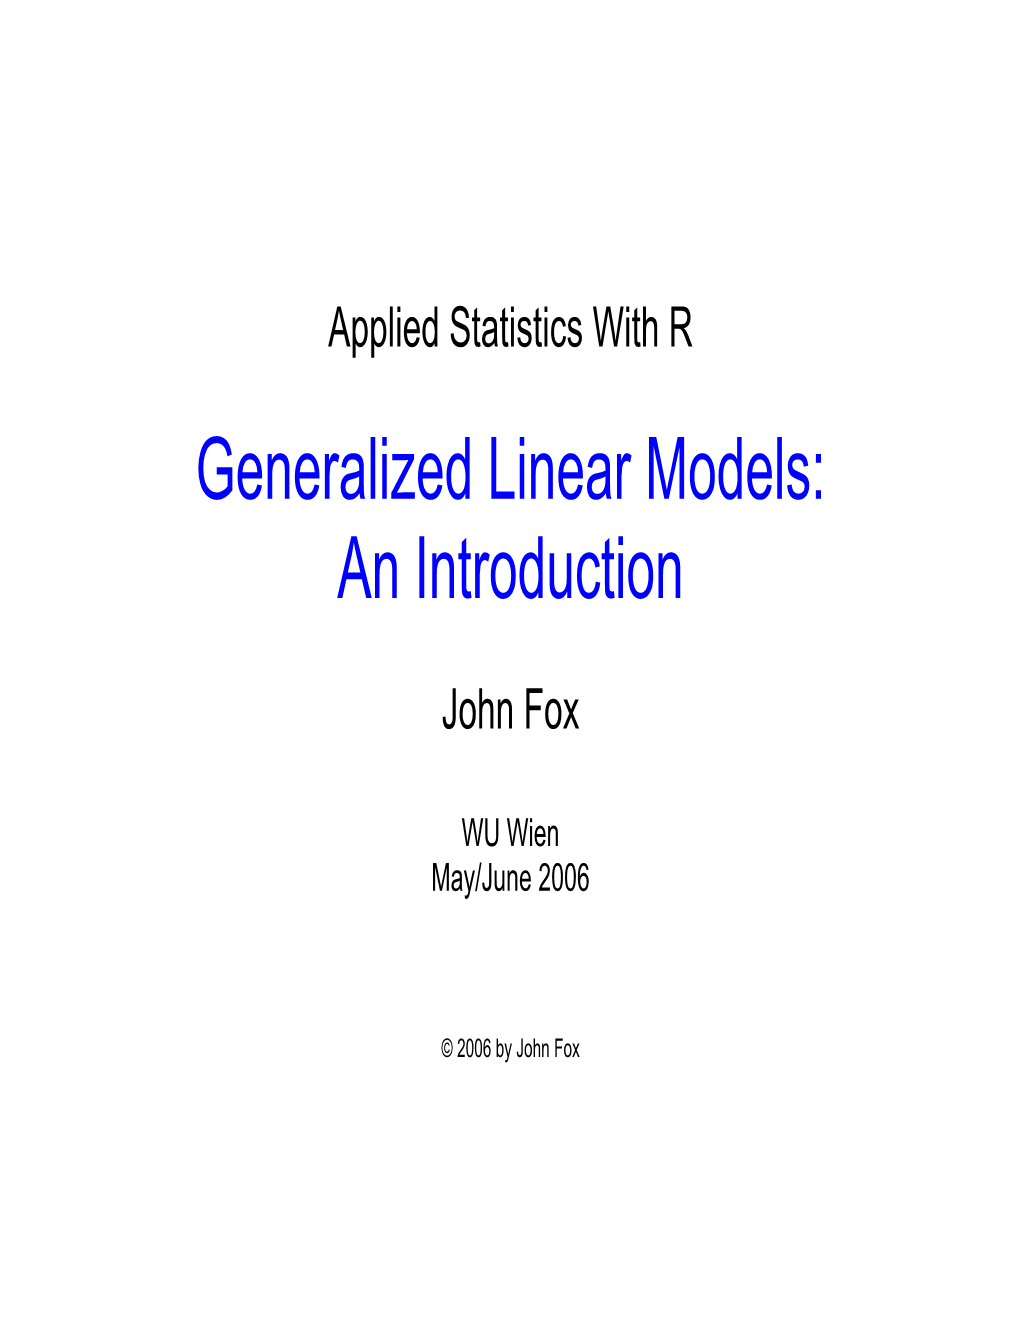 Generalized Linear Models: an Introduction